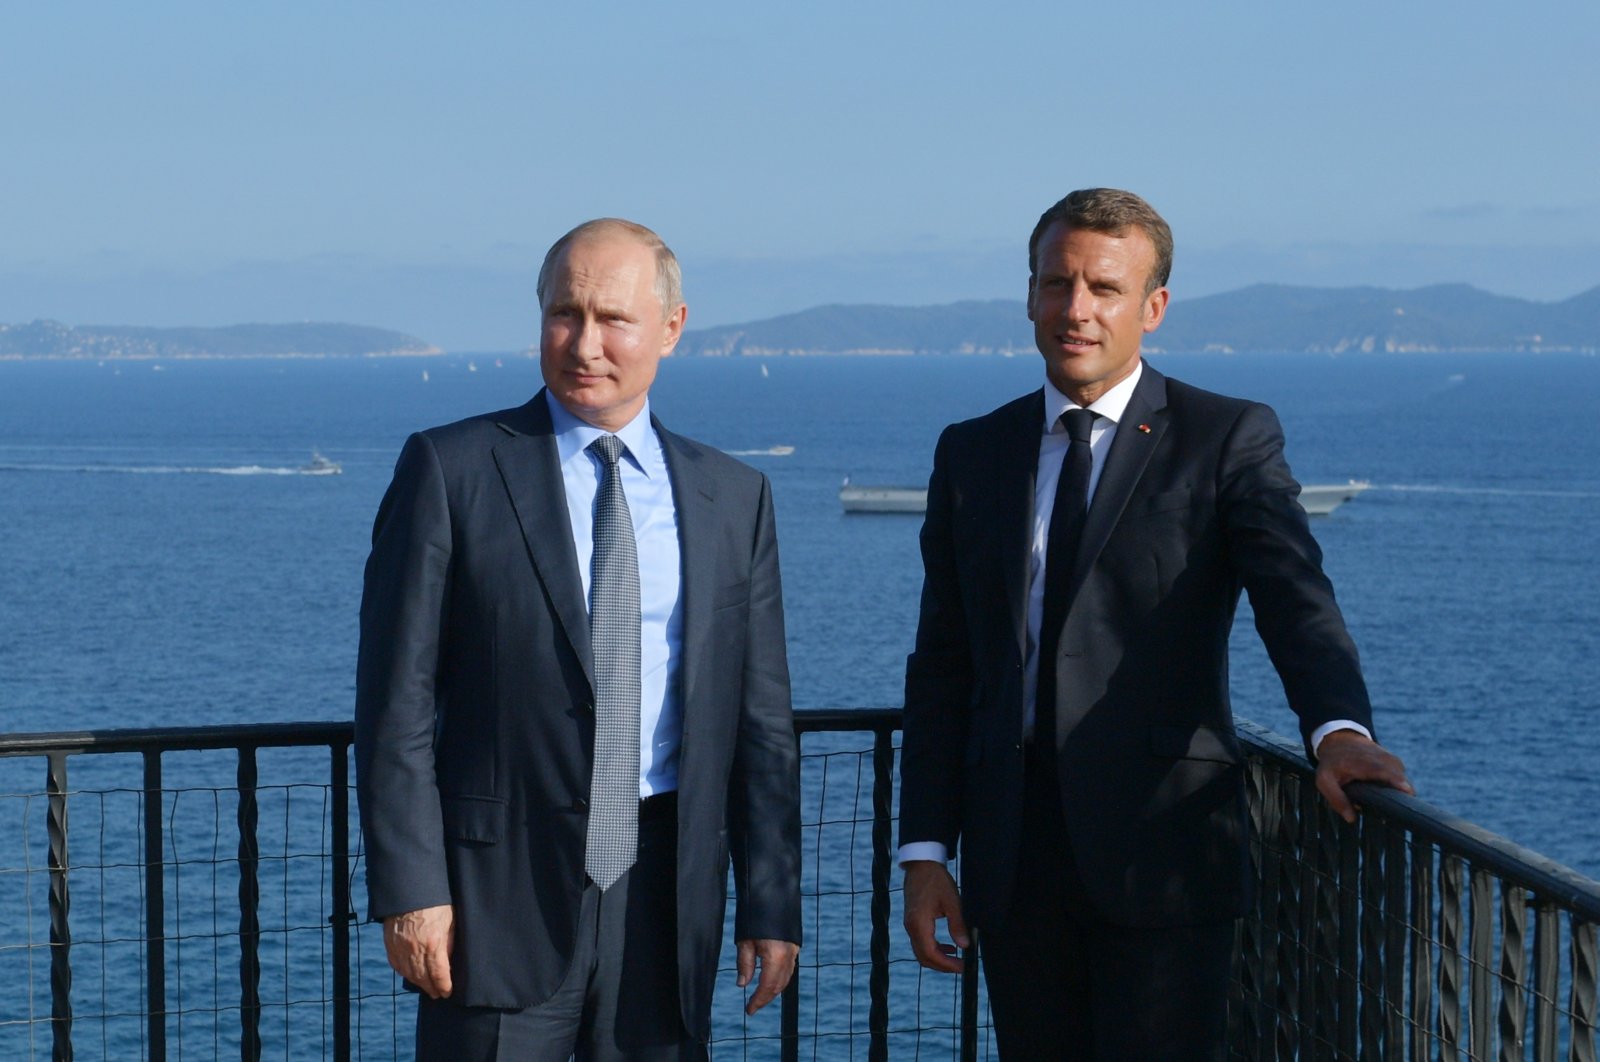 French President Emmanuel Macron, right, and his Russian counterpart Vladimir Putin pose for a photo during their meeting at the fort of Bregancon in Bormes-les-Mimosas, southern France, on Aug. 19, 2019. (AP Photo)